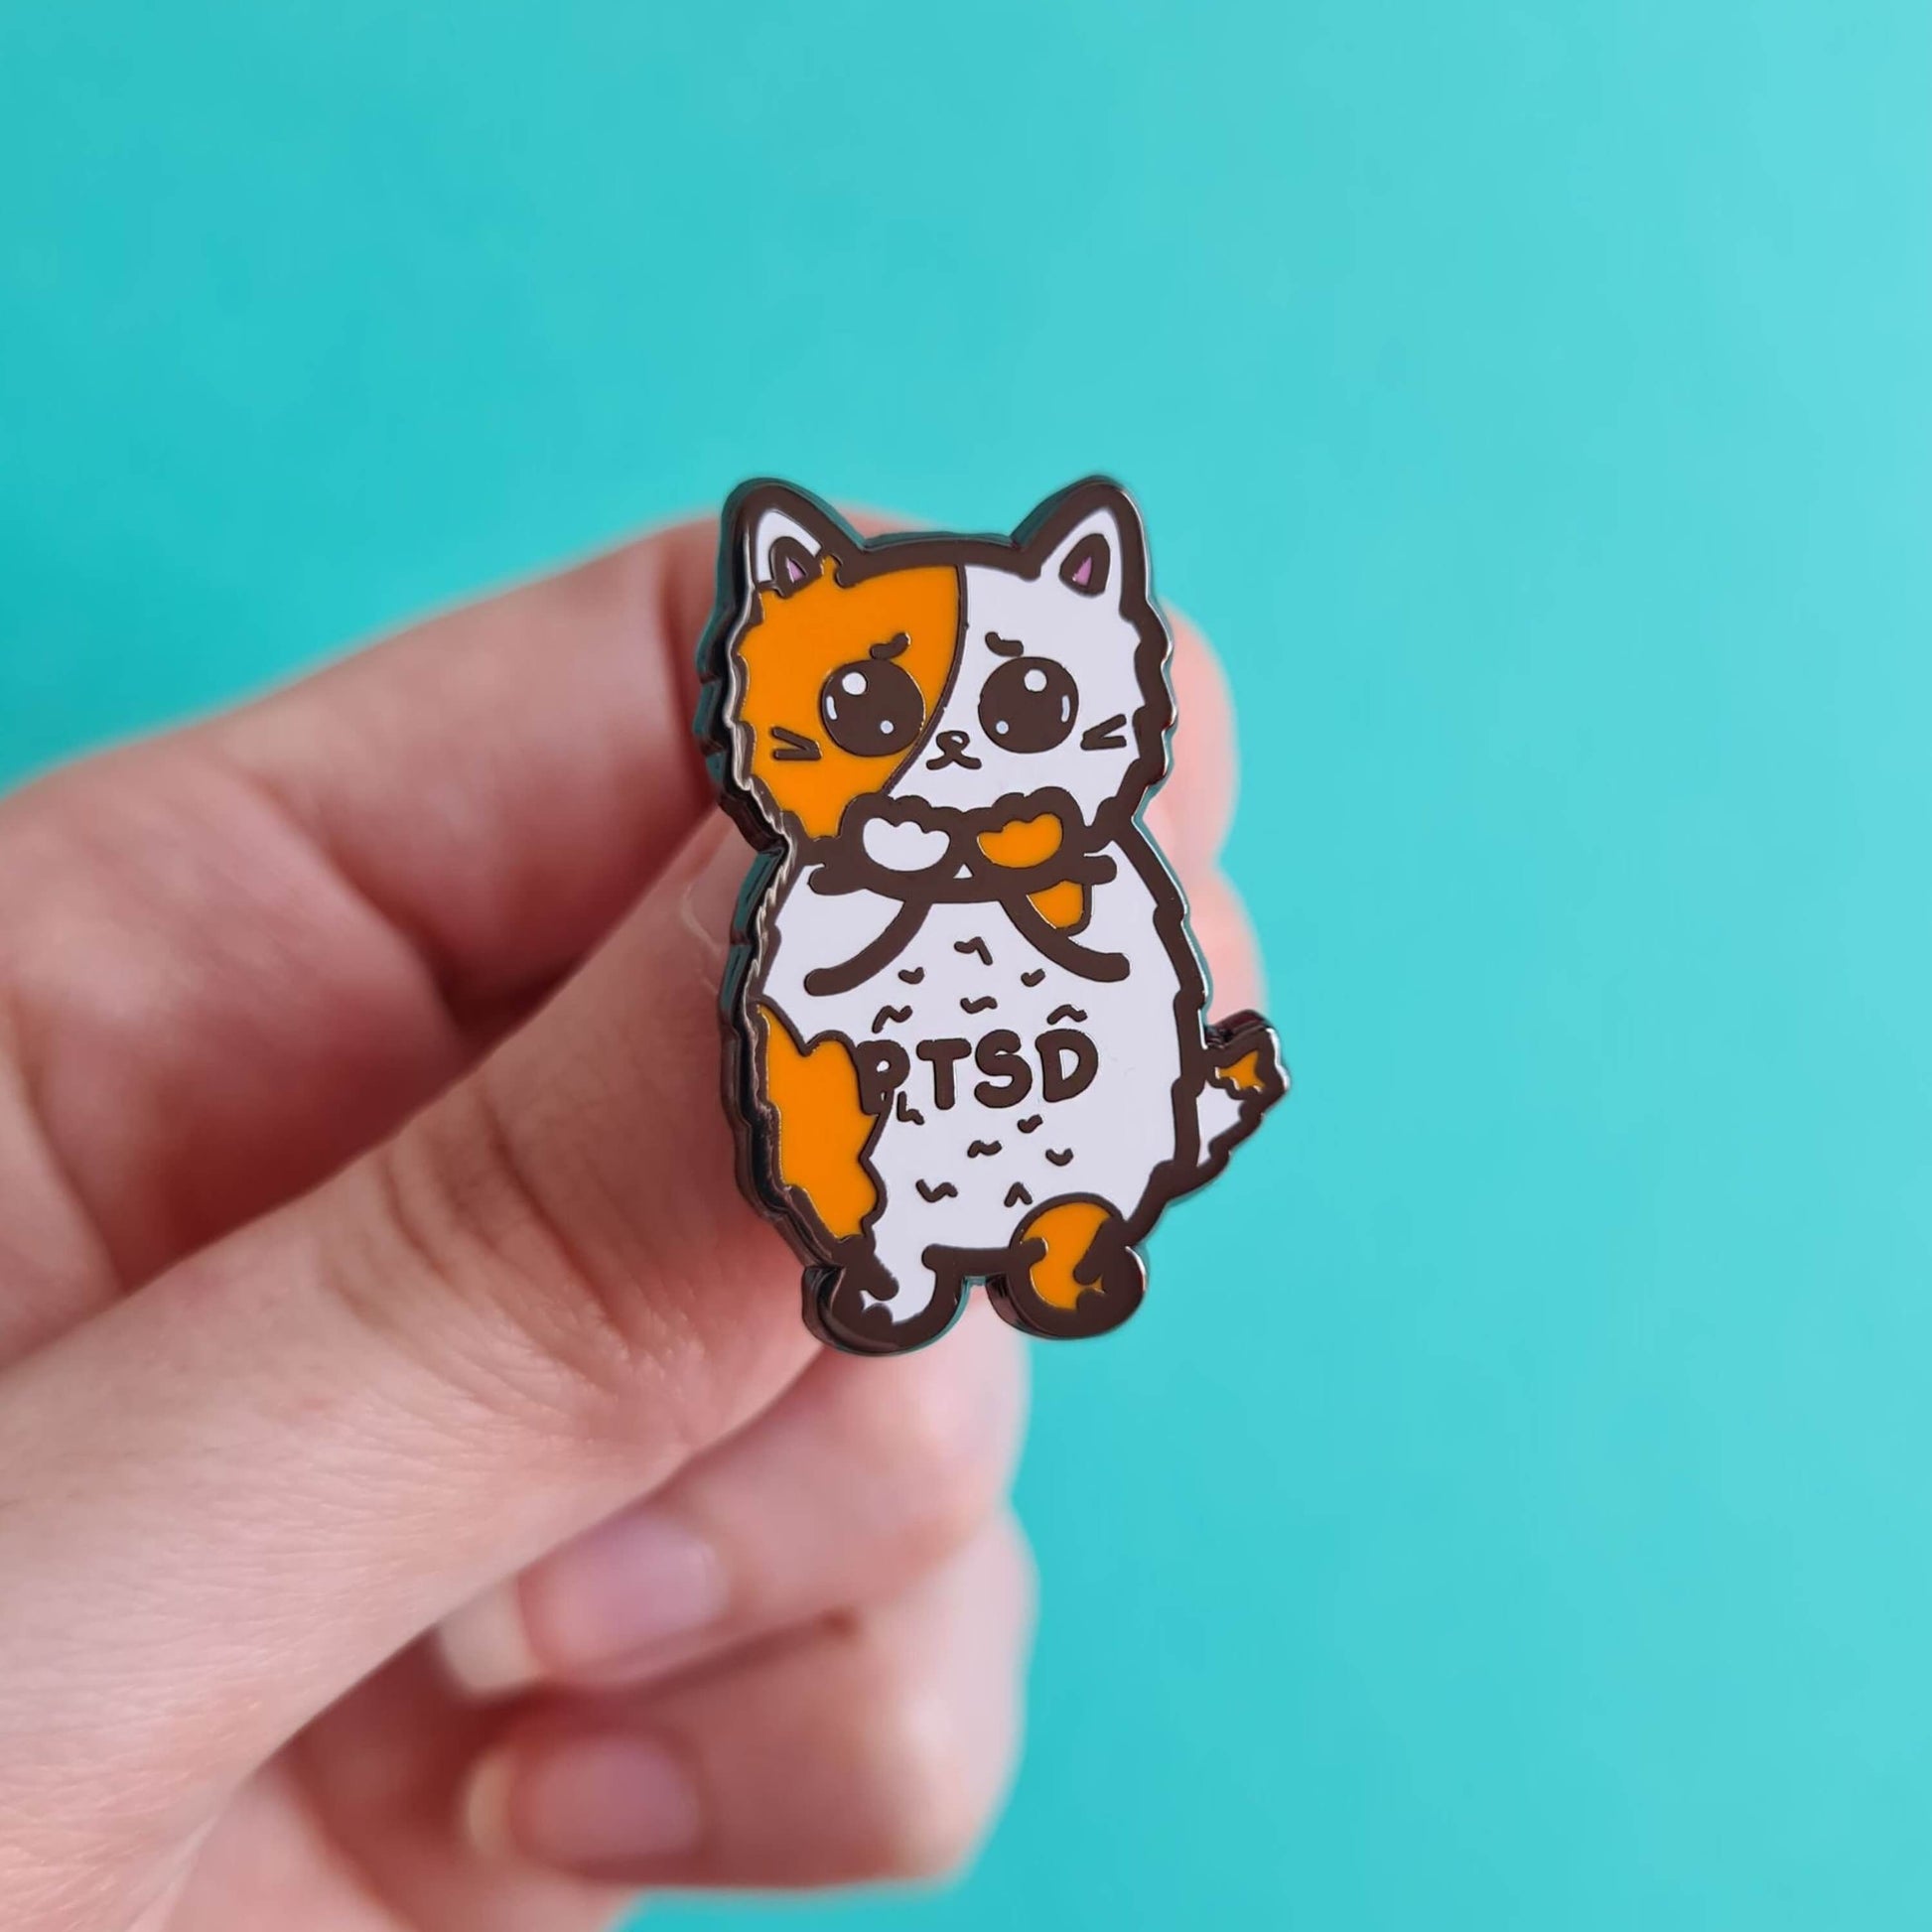 The PTSD Cat Enamel Pin - Post-Traumatic Stress Disorder held over a blue background. An orange and white scared cat with black text across its belly reading 'PTSD'. The hand drawn design is raising awareness for post traumatic stress disorder.